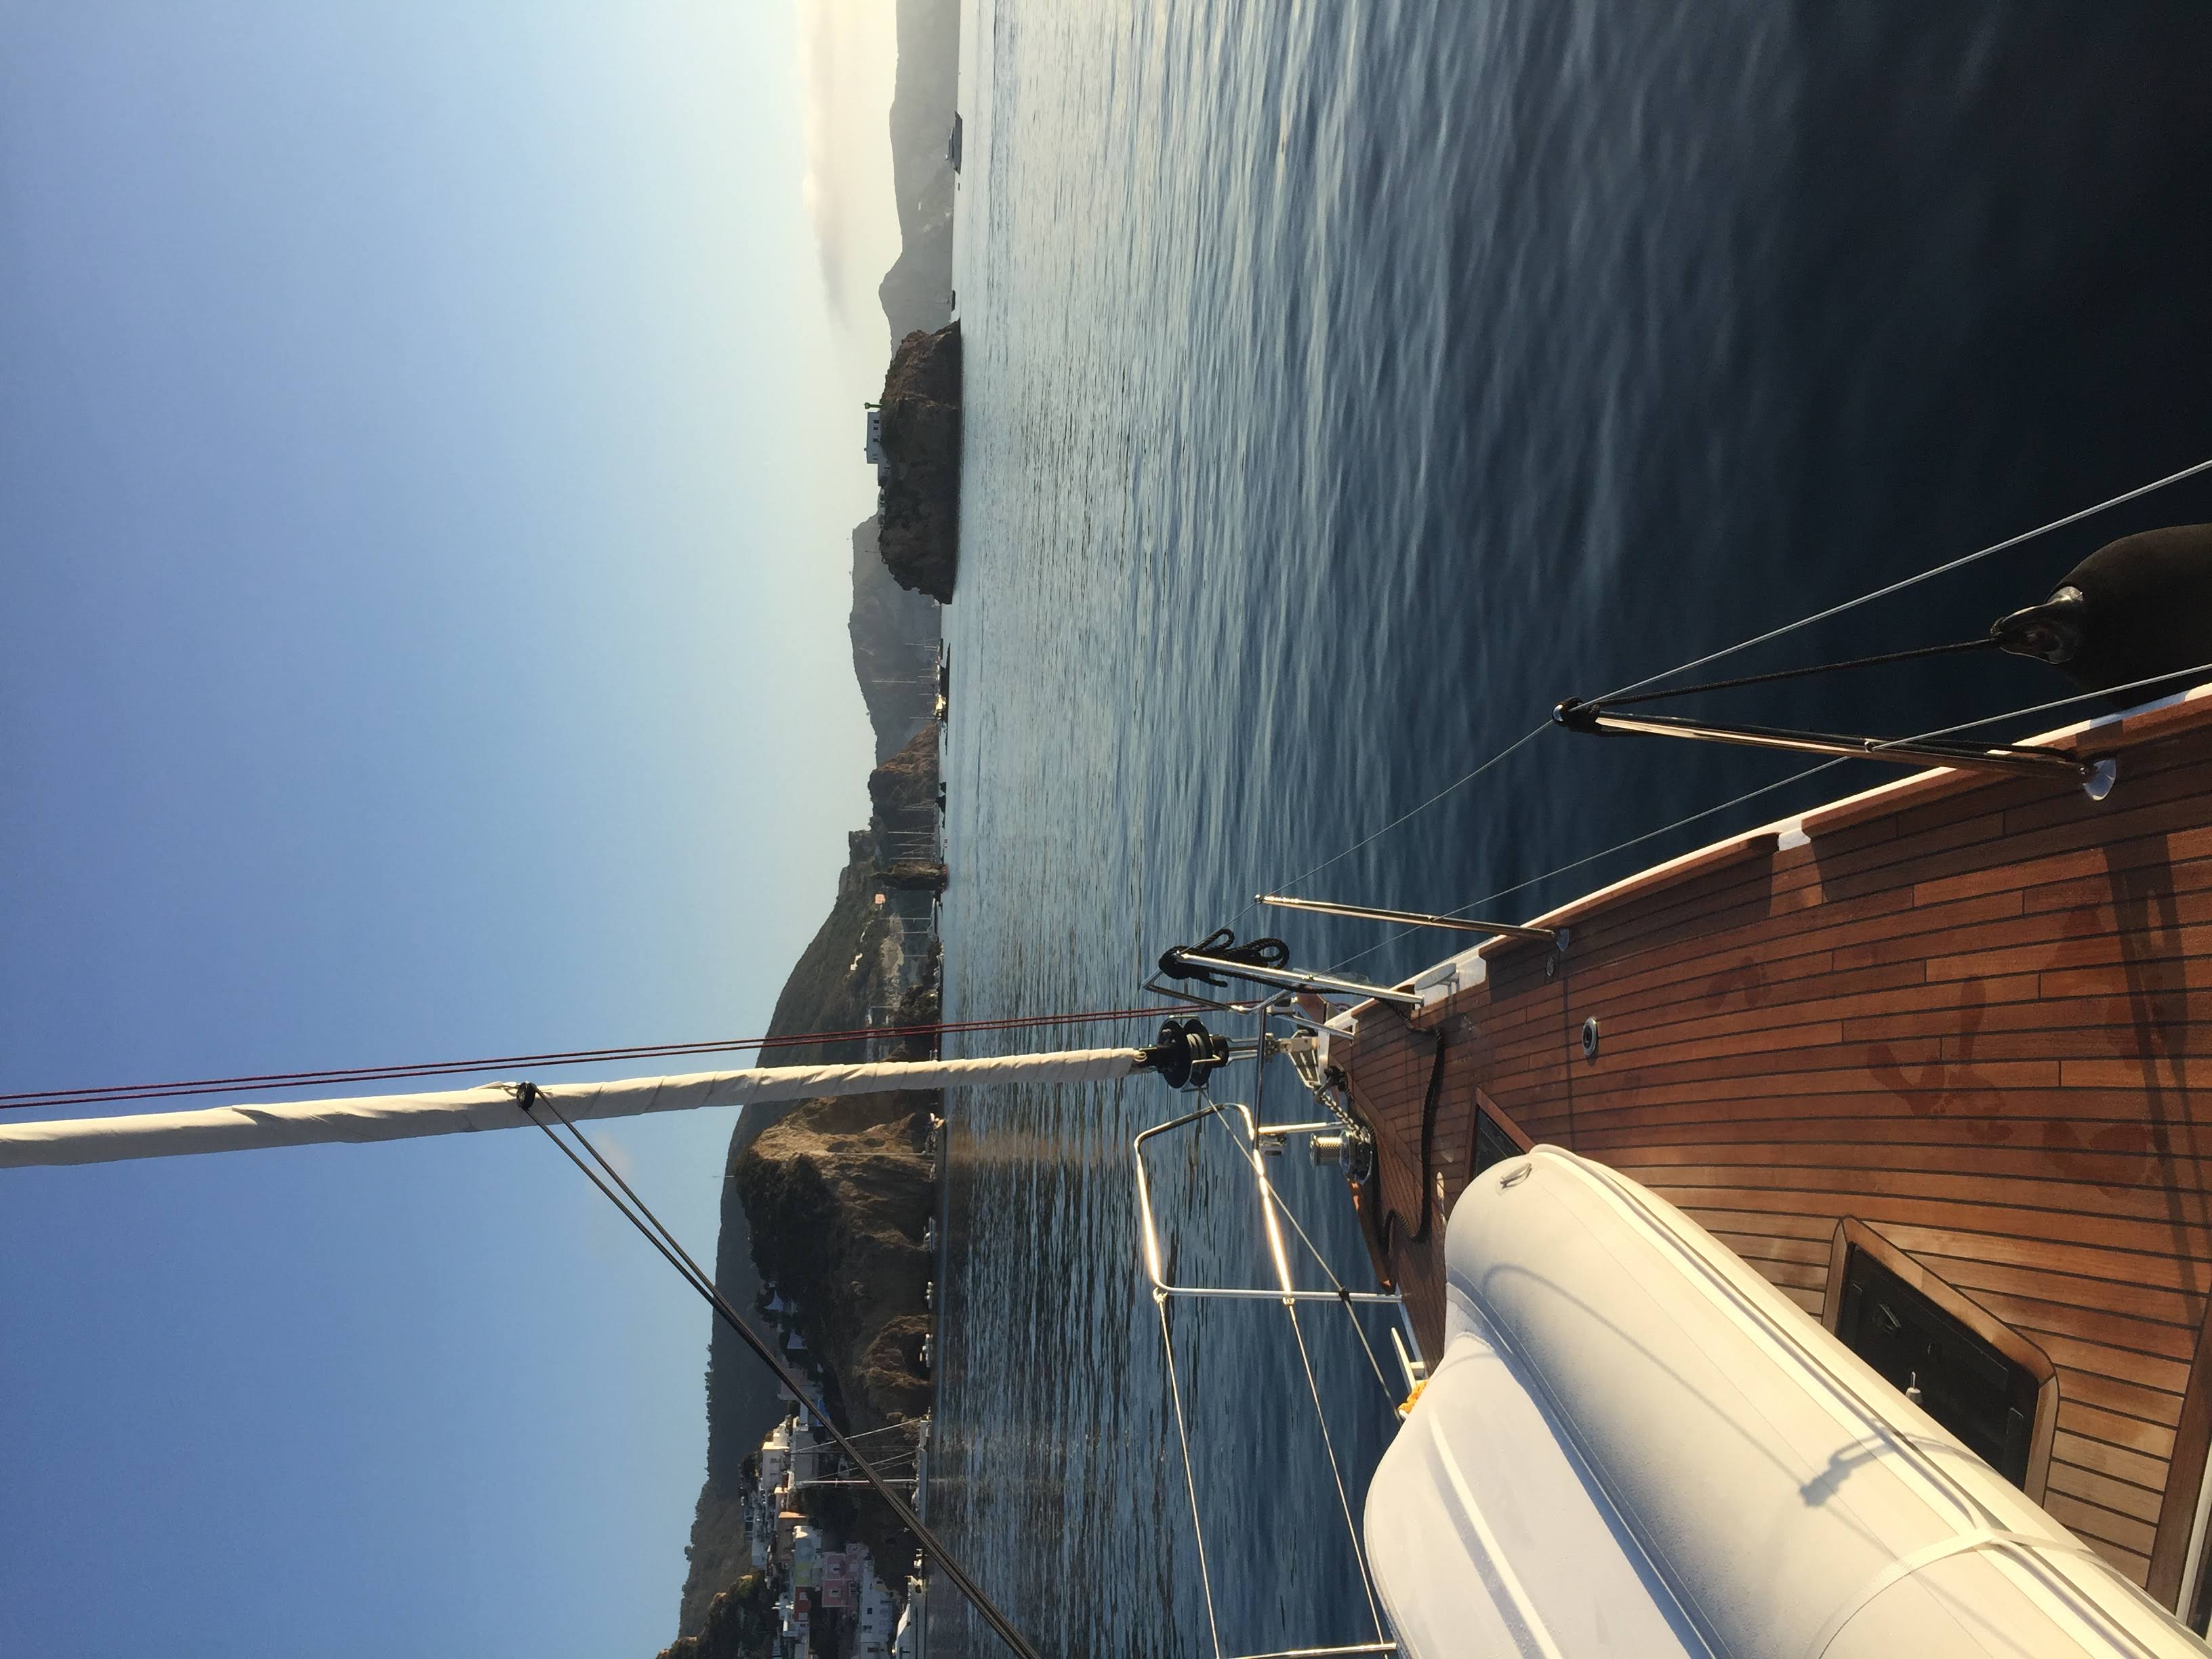 Oceanis 55.1 - Luxury yacht charter Greece & Boat hire in Greece Athens and Saronic Gulf Athens Alimos Alimos Marina 6